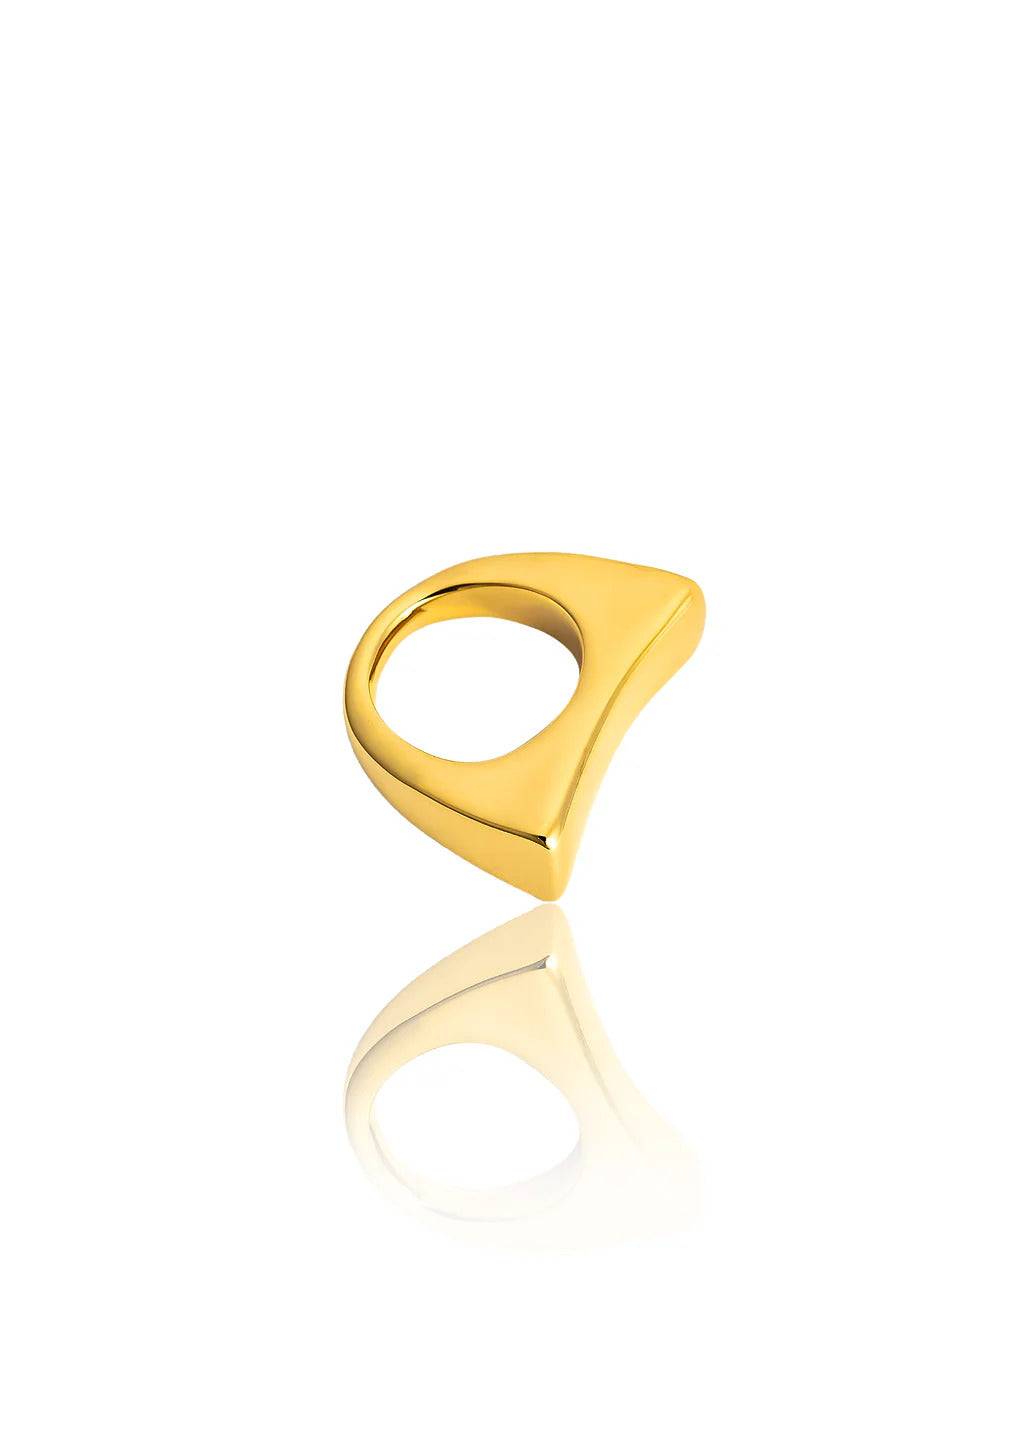 Geometric curved dome shaped 18k gold filled ring from Inaury.com